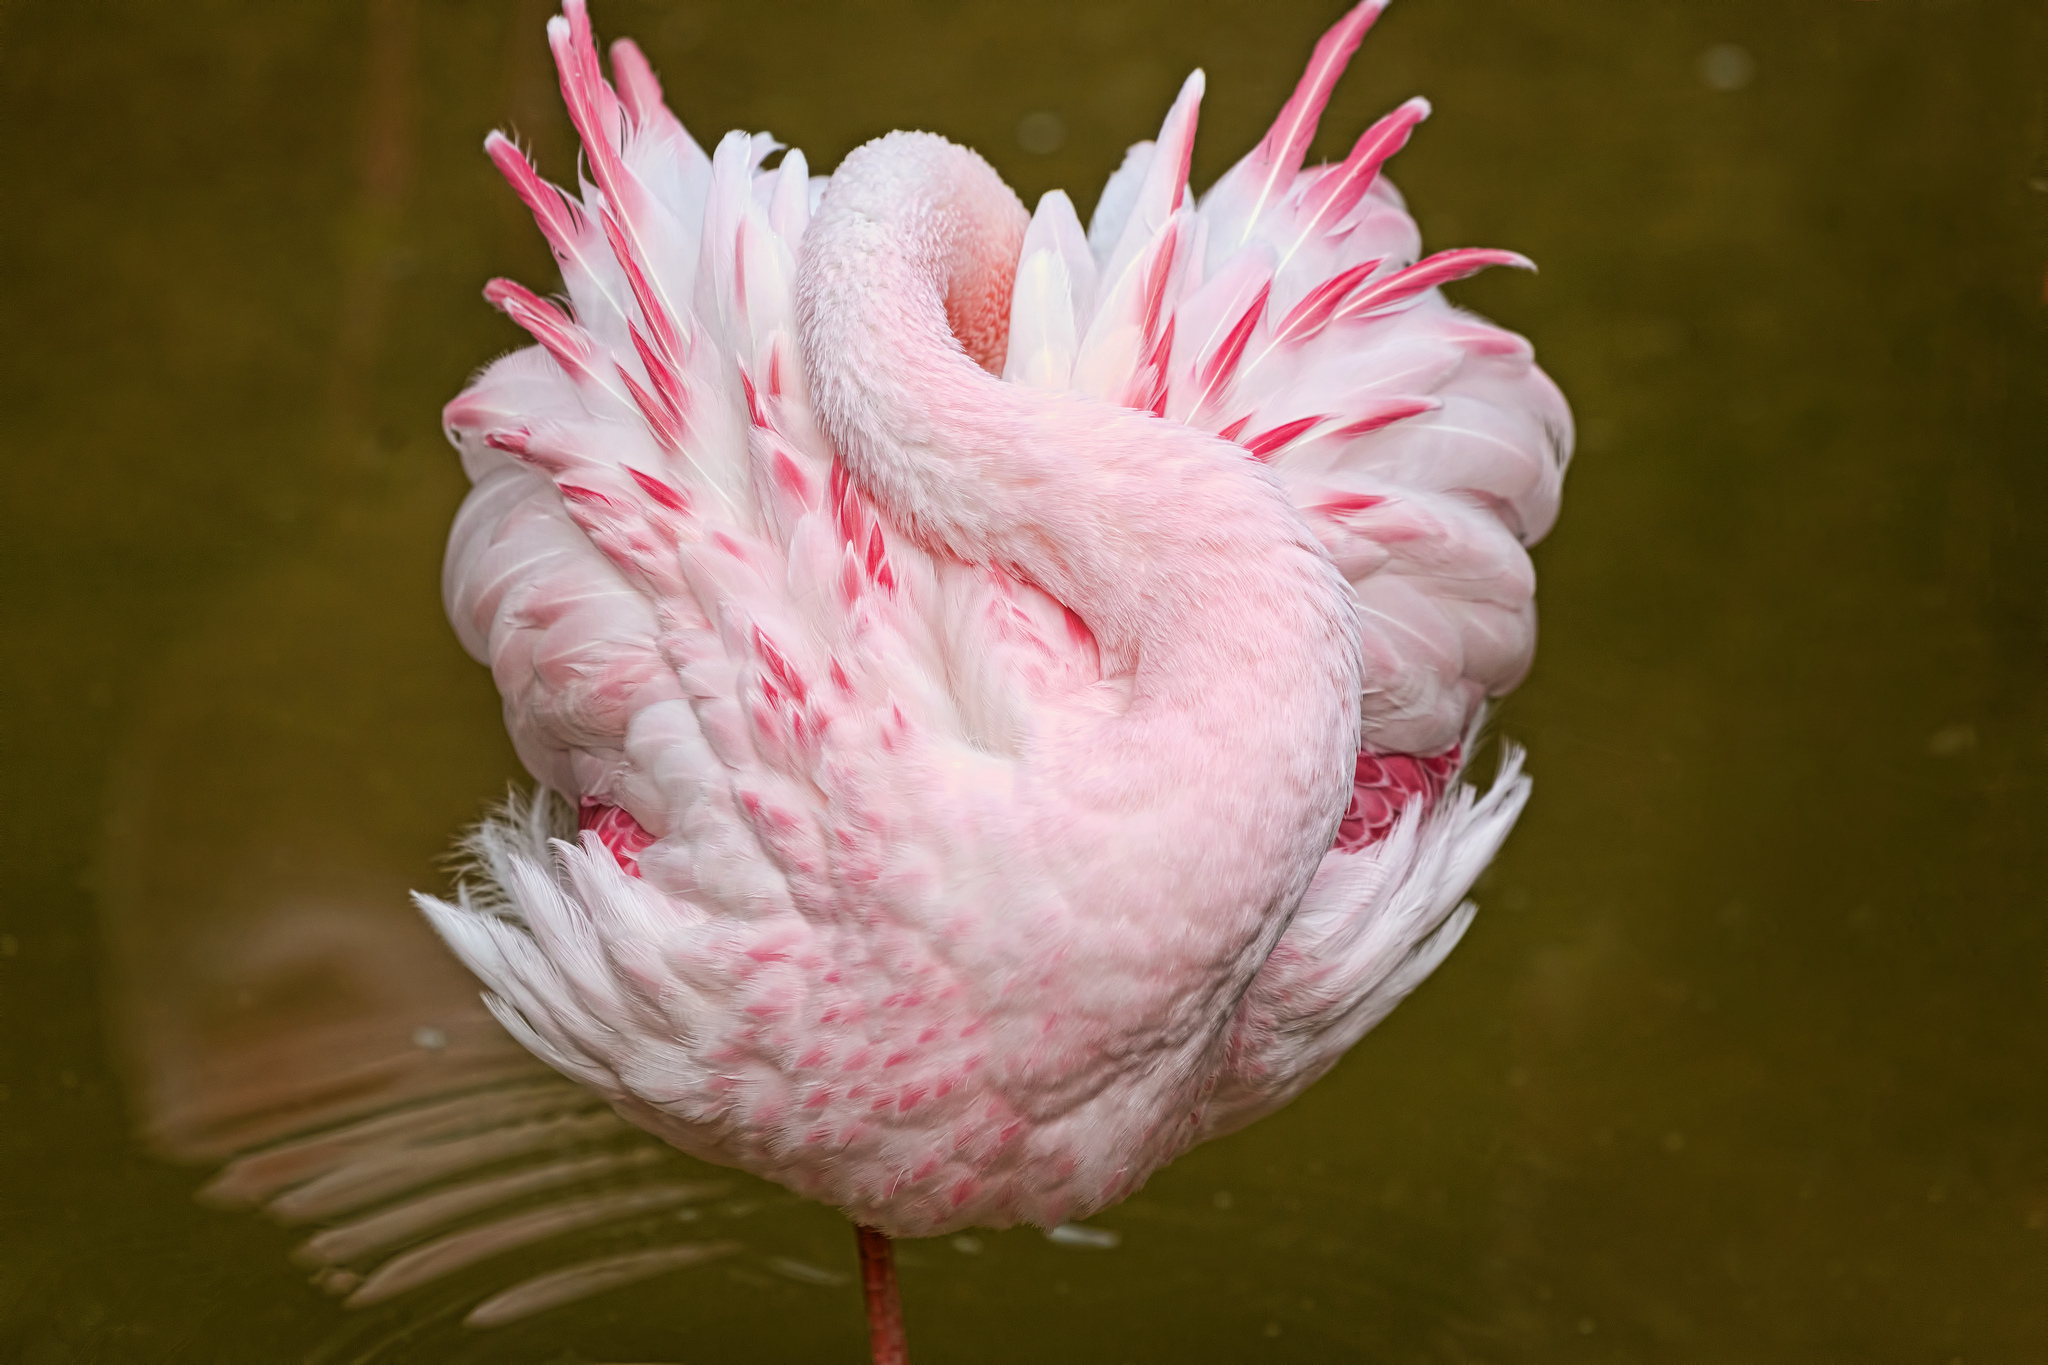 69723 download wallpaper animals, pink, flamingo, bird, sleep, dream screensavers and pictures for free